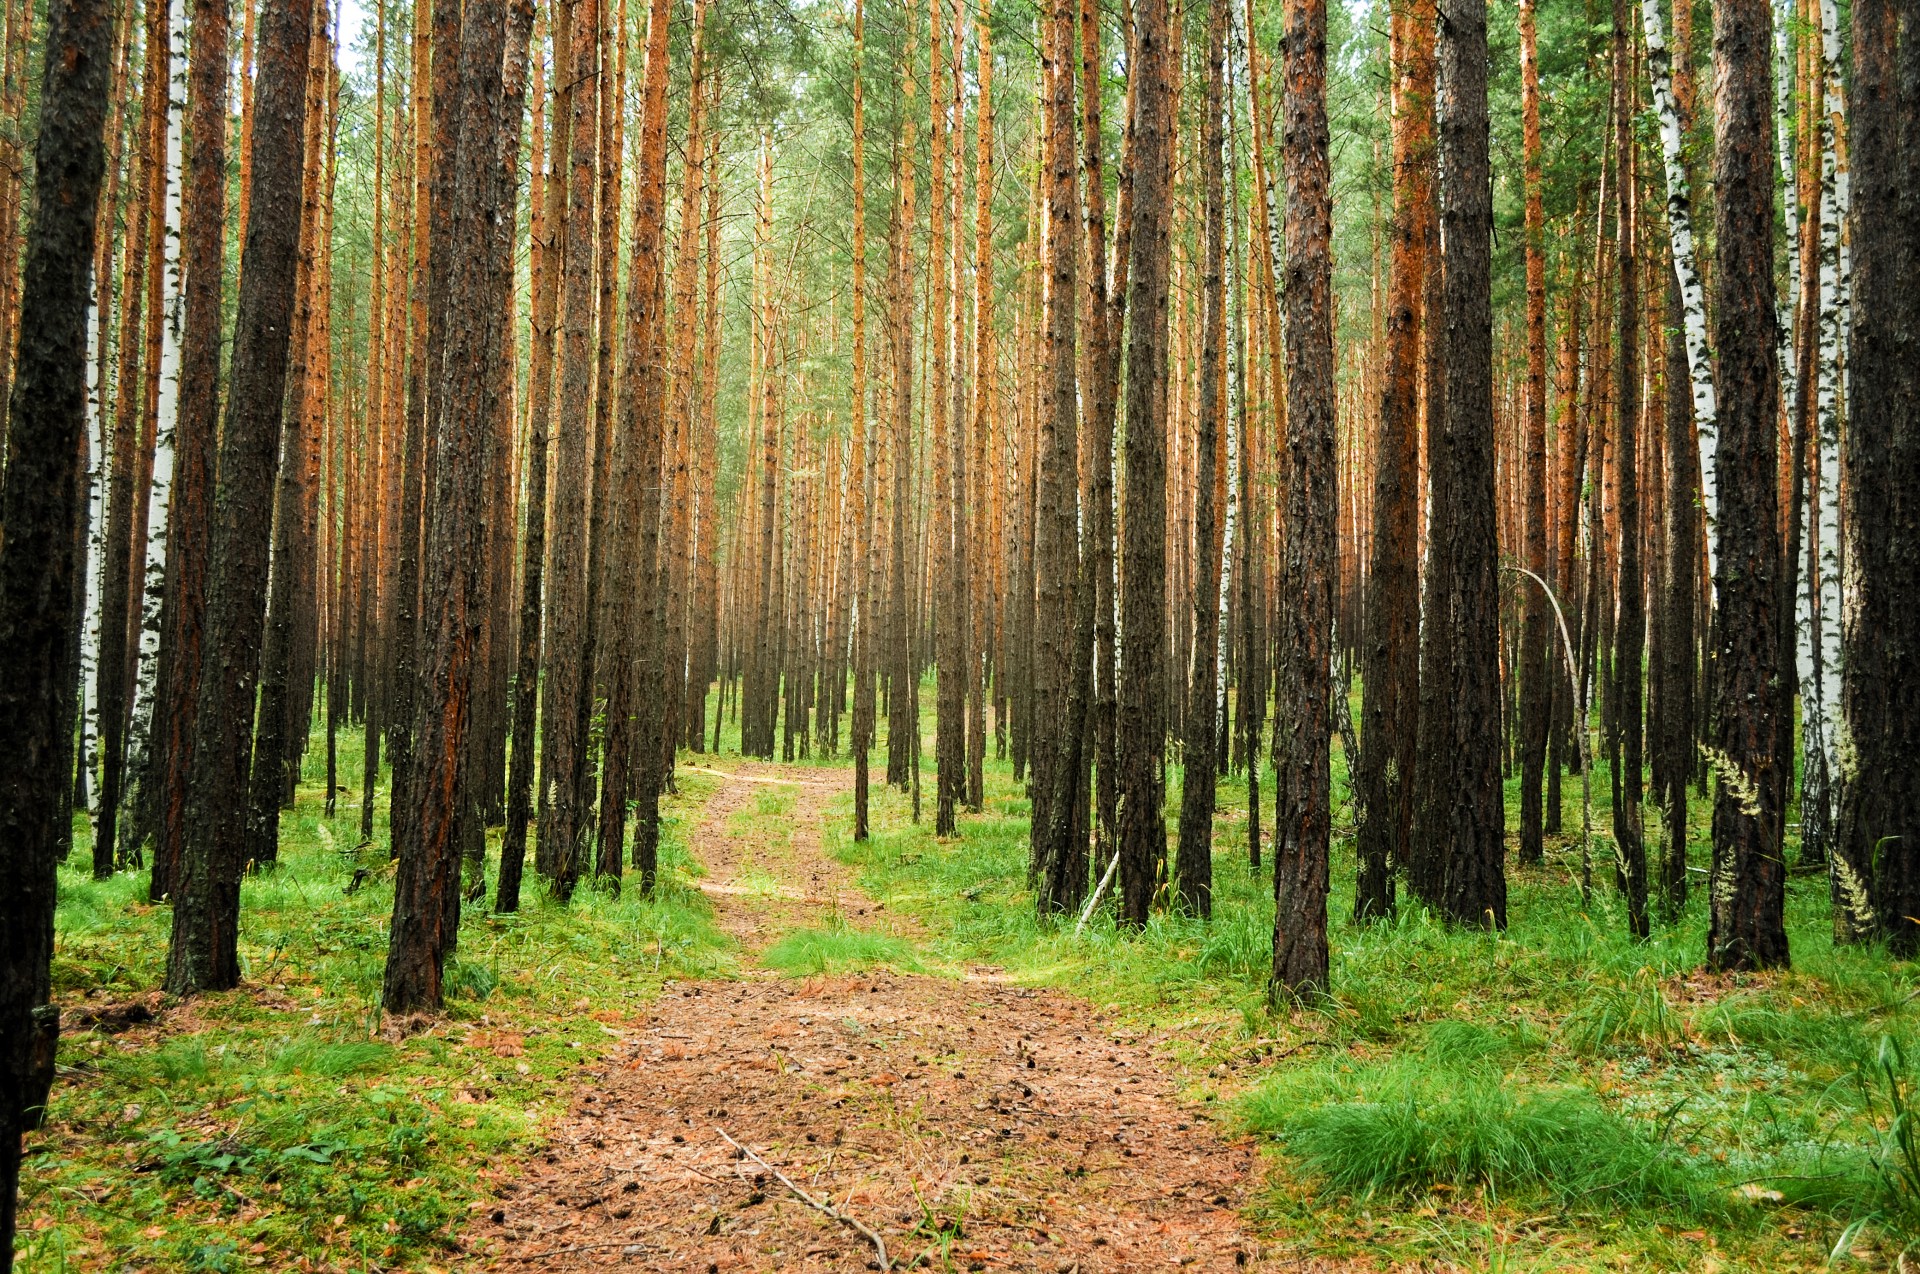 A path in a pine forest